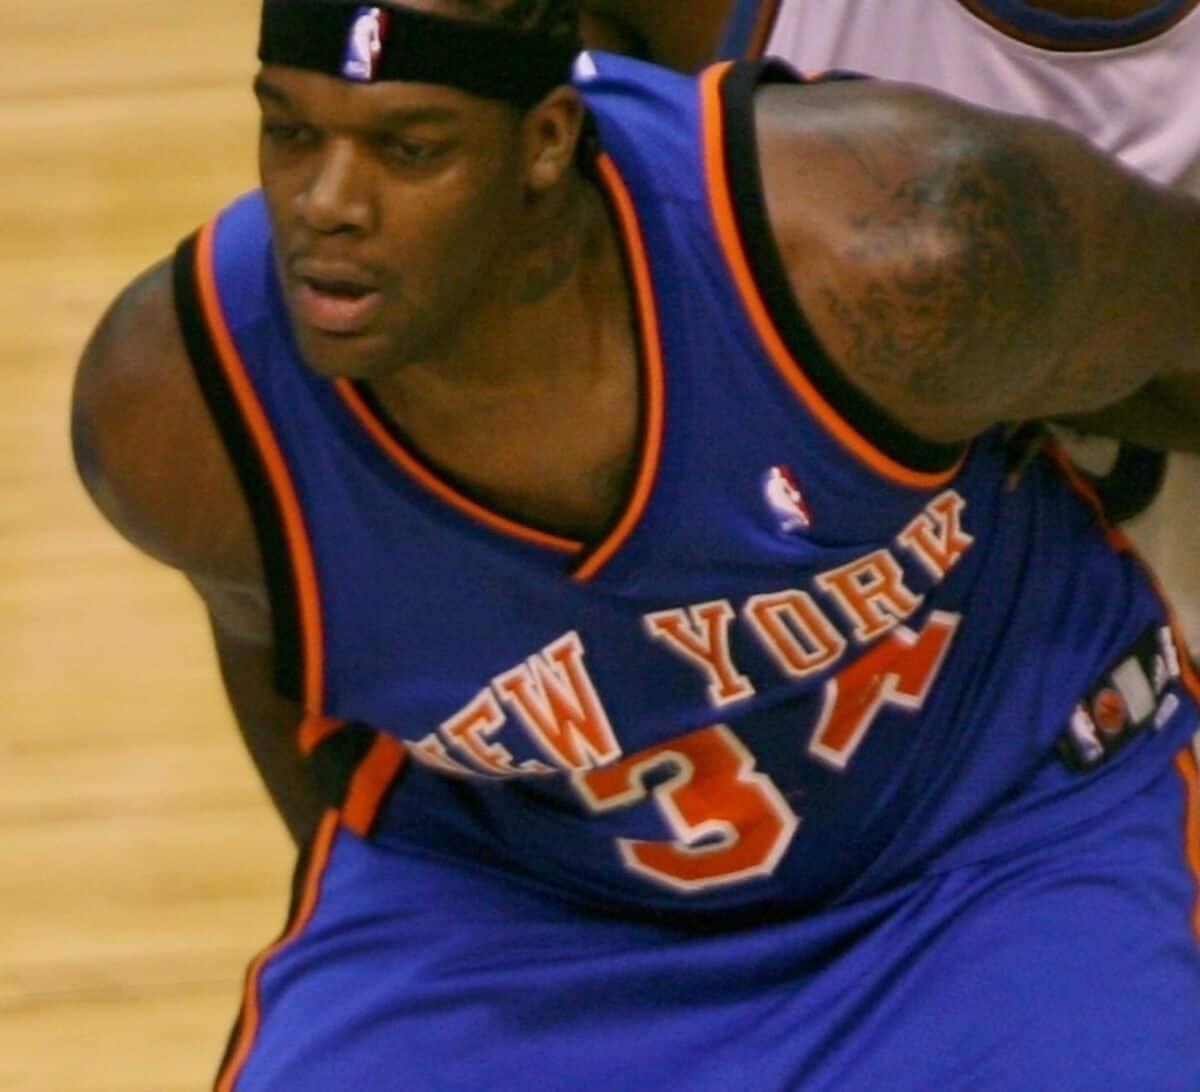 Eddy Curry - Famous Basketball Player